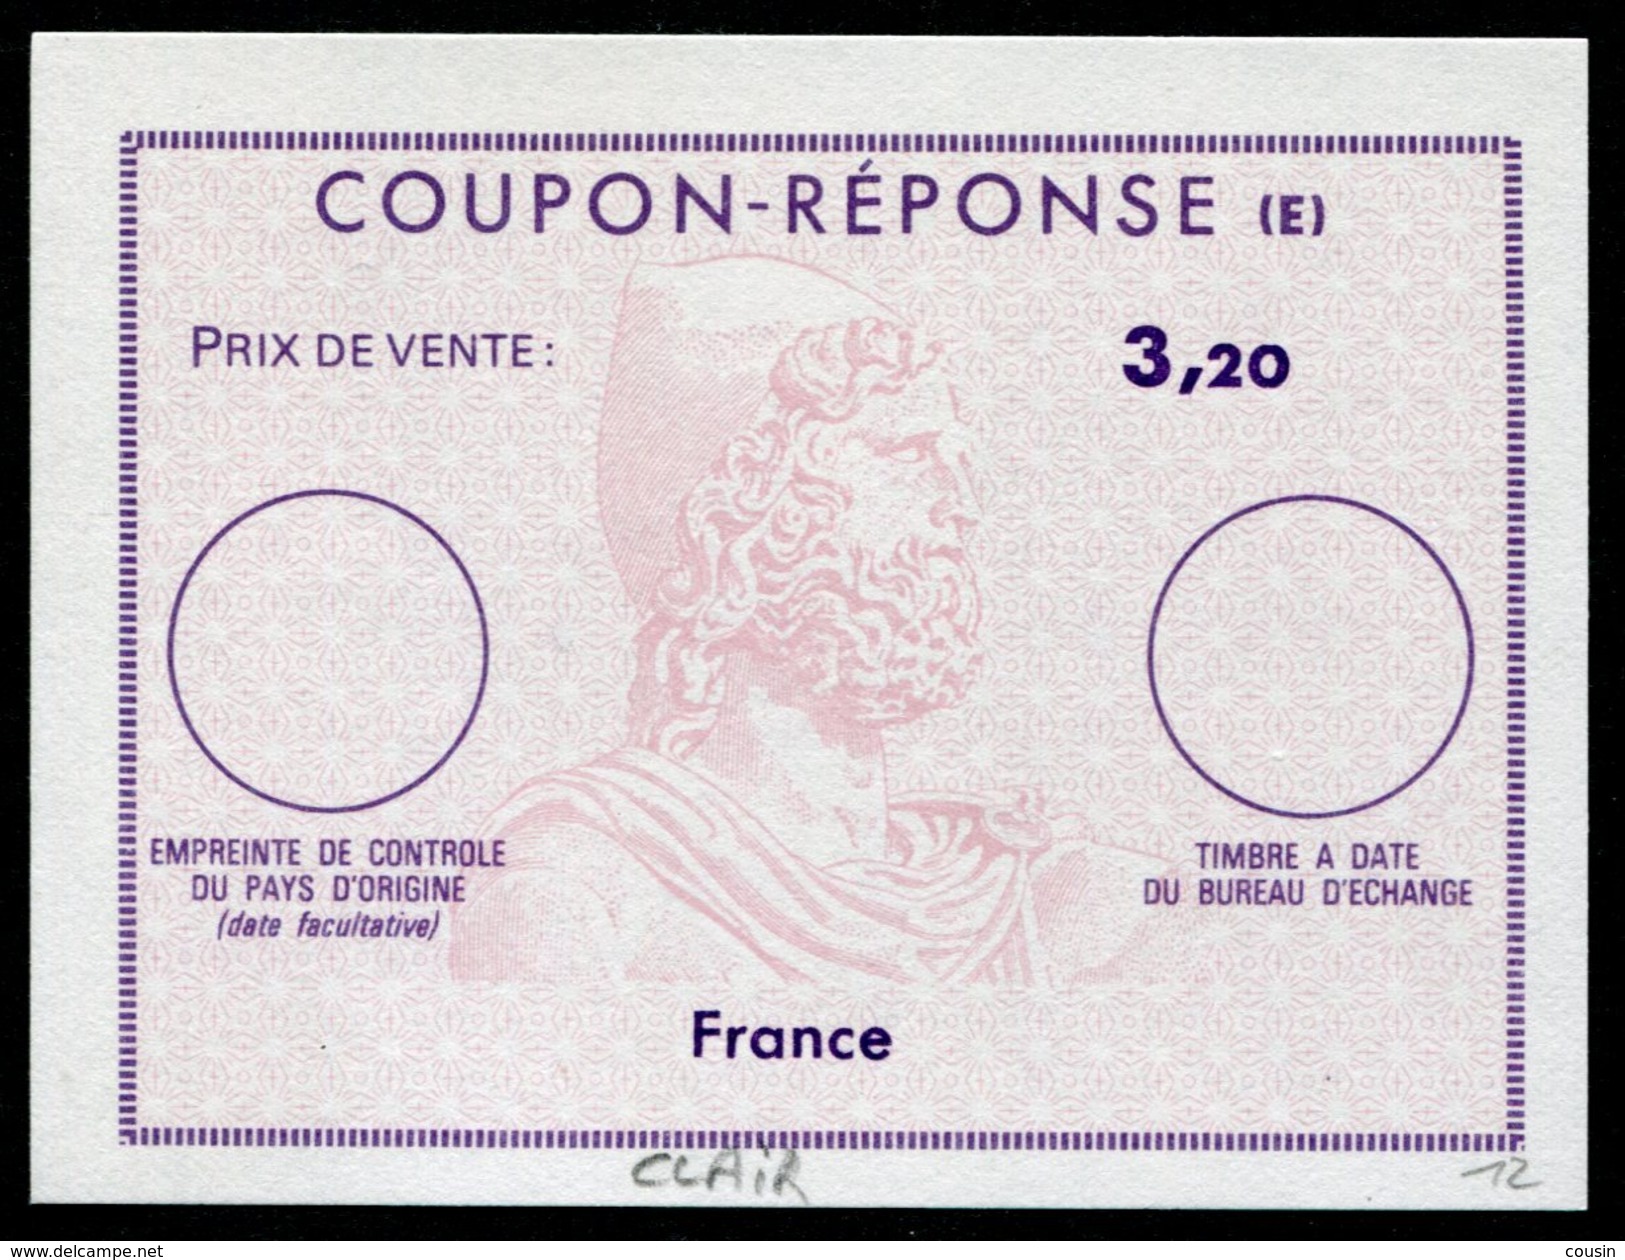 FRANCE  French Reply Coupon  /  Coupon Réponse Régime Français - Antwoordbons